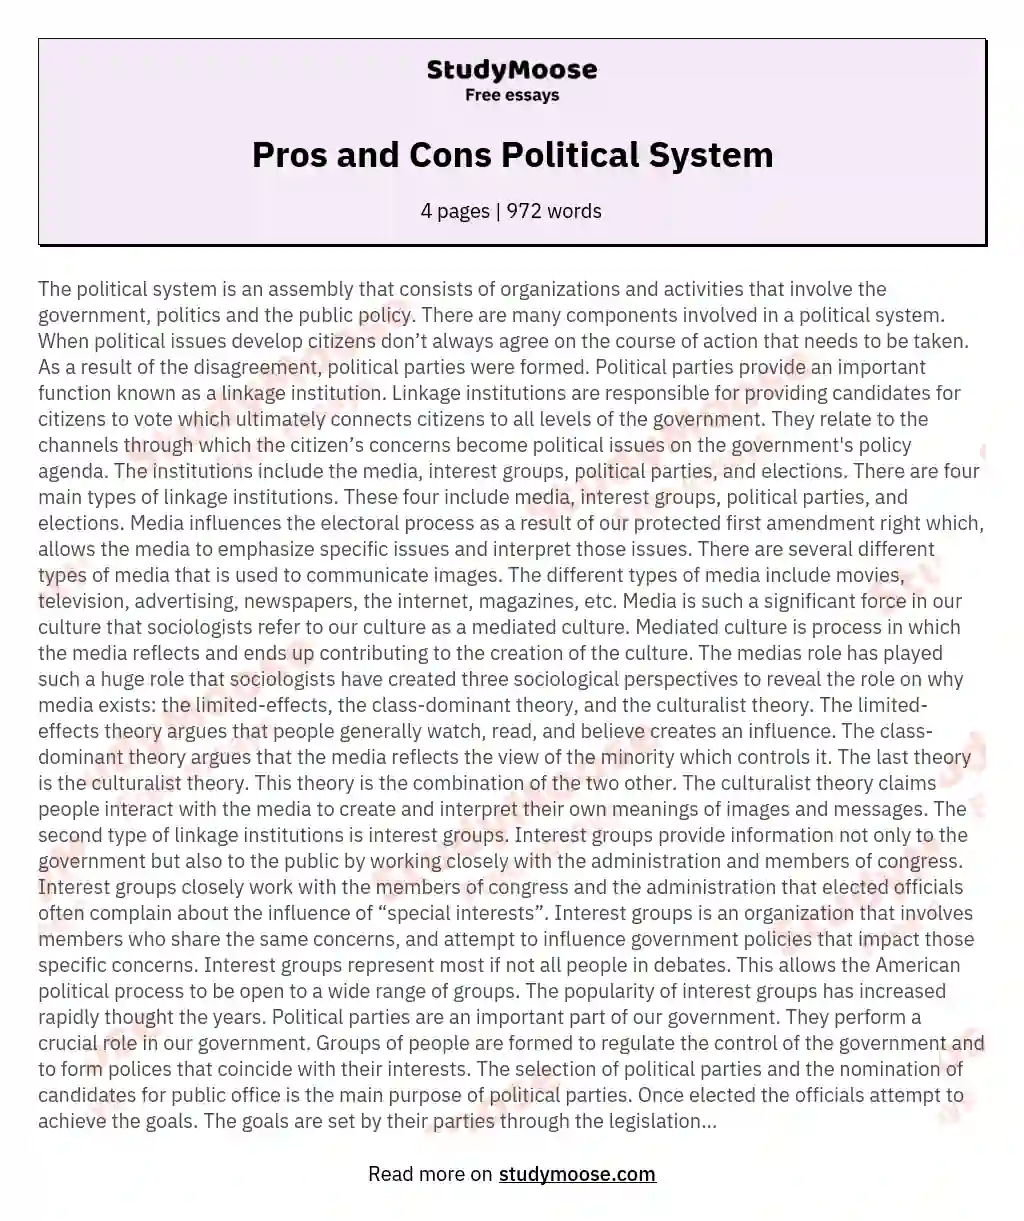 Pros and Cons Political System essay